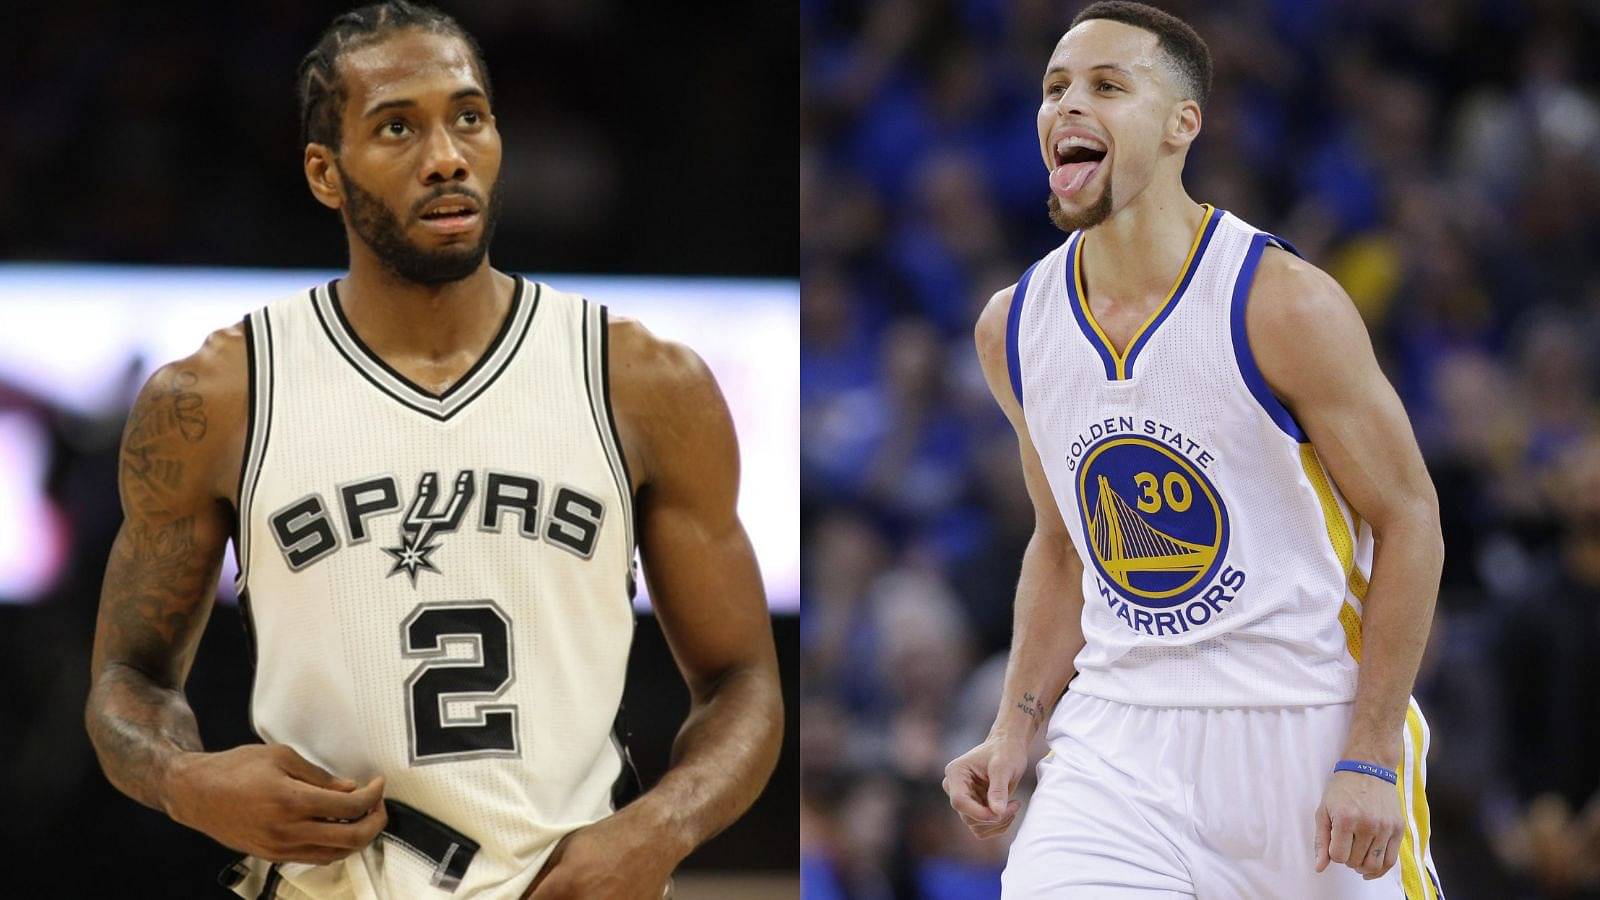 An MVP Stephen Curry made DPOY Kawhi Leonard touch earth without even having basketball in his hands